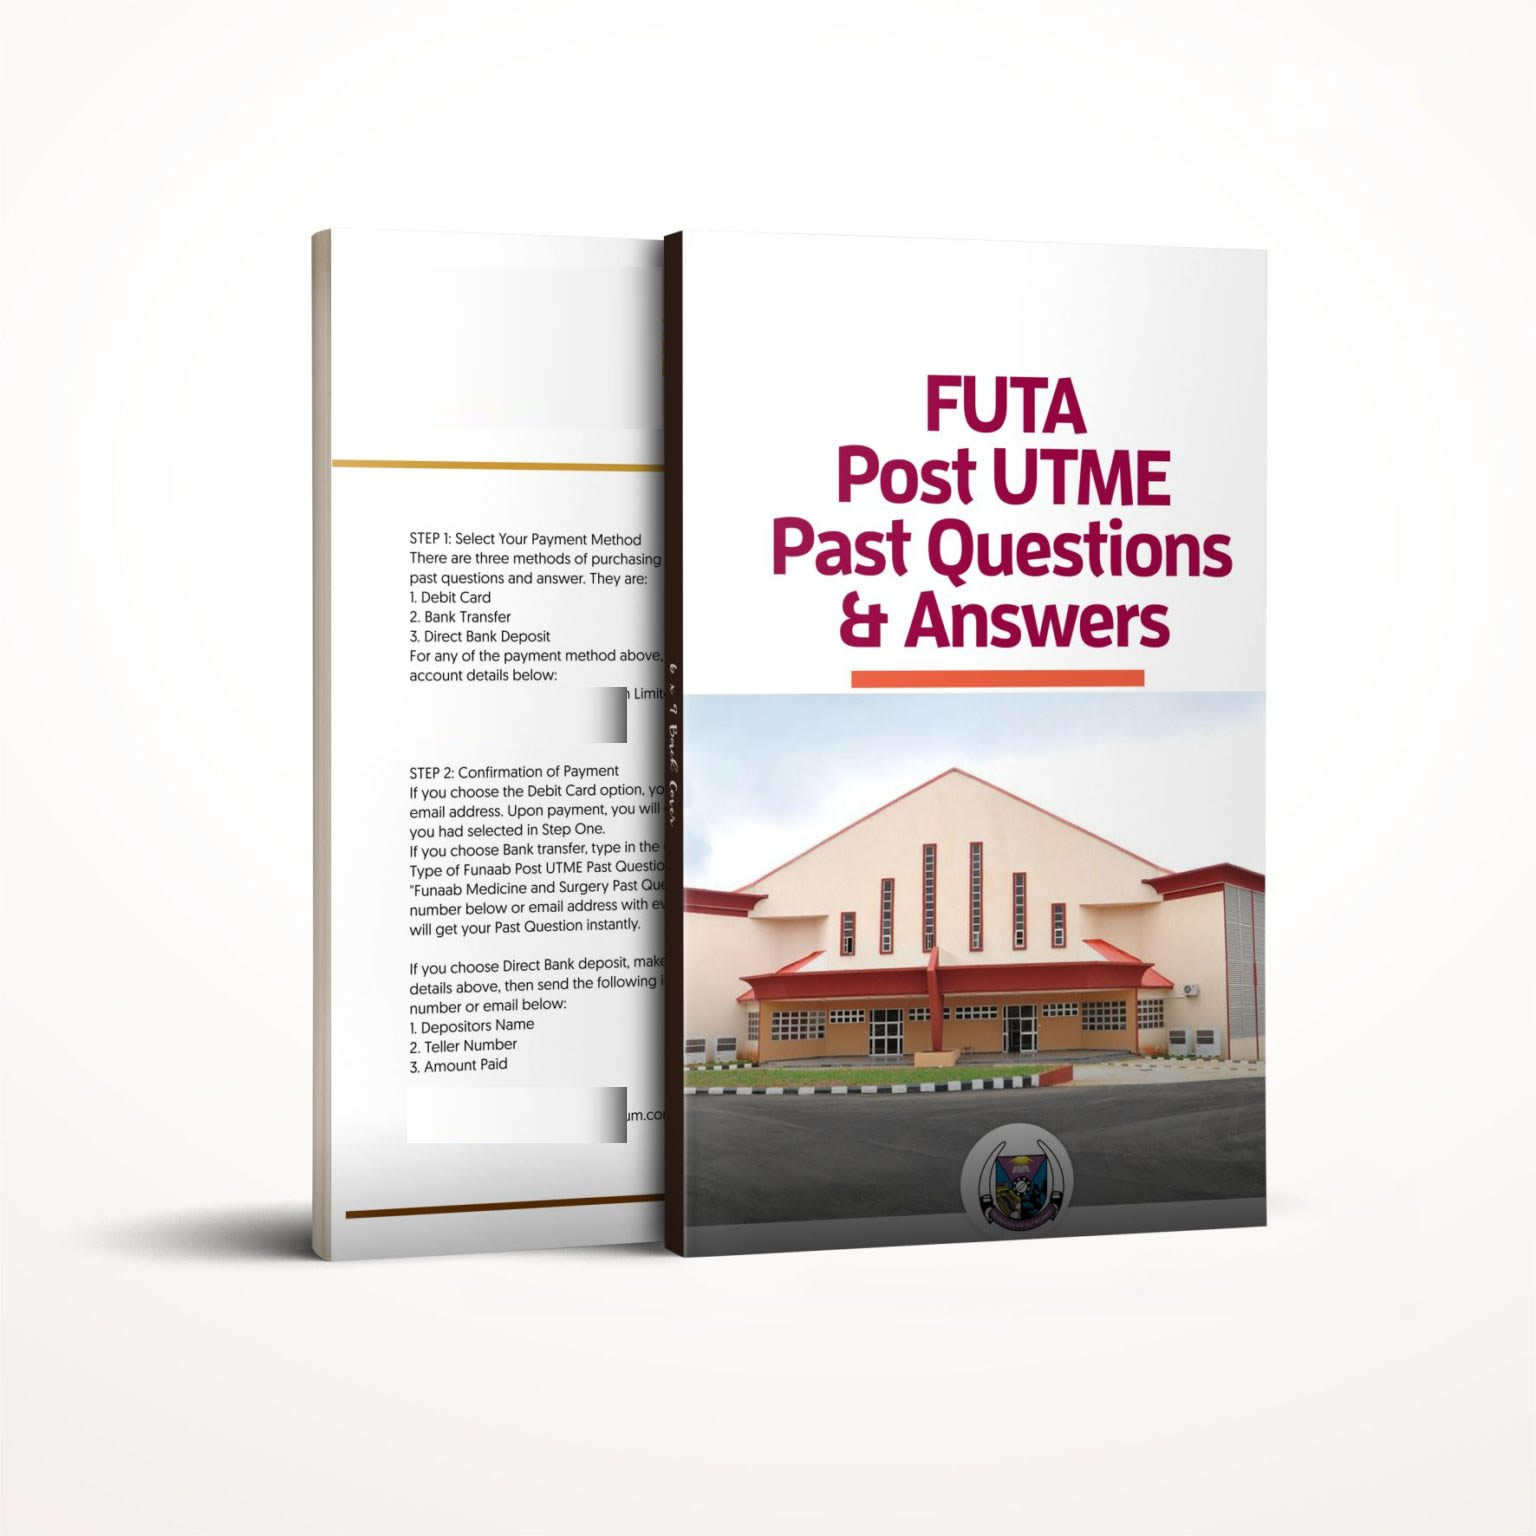 FUTA Post UTME past questions and answers